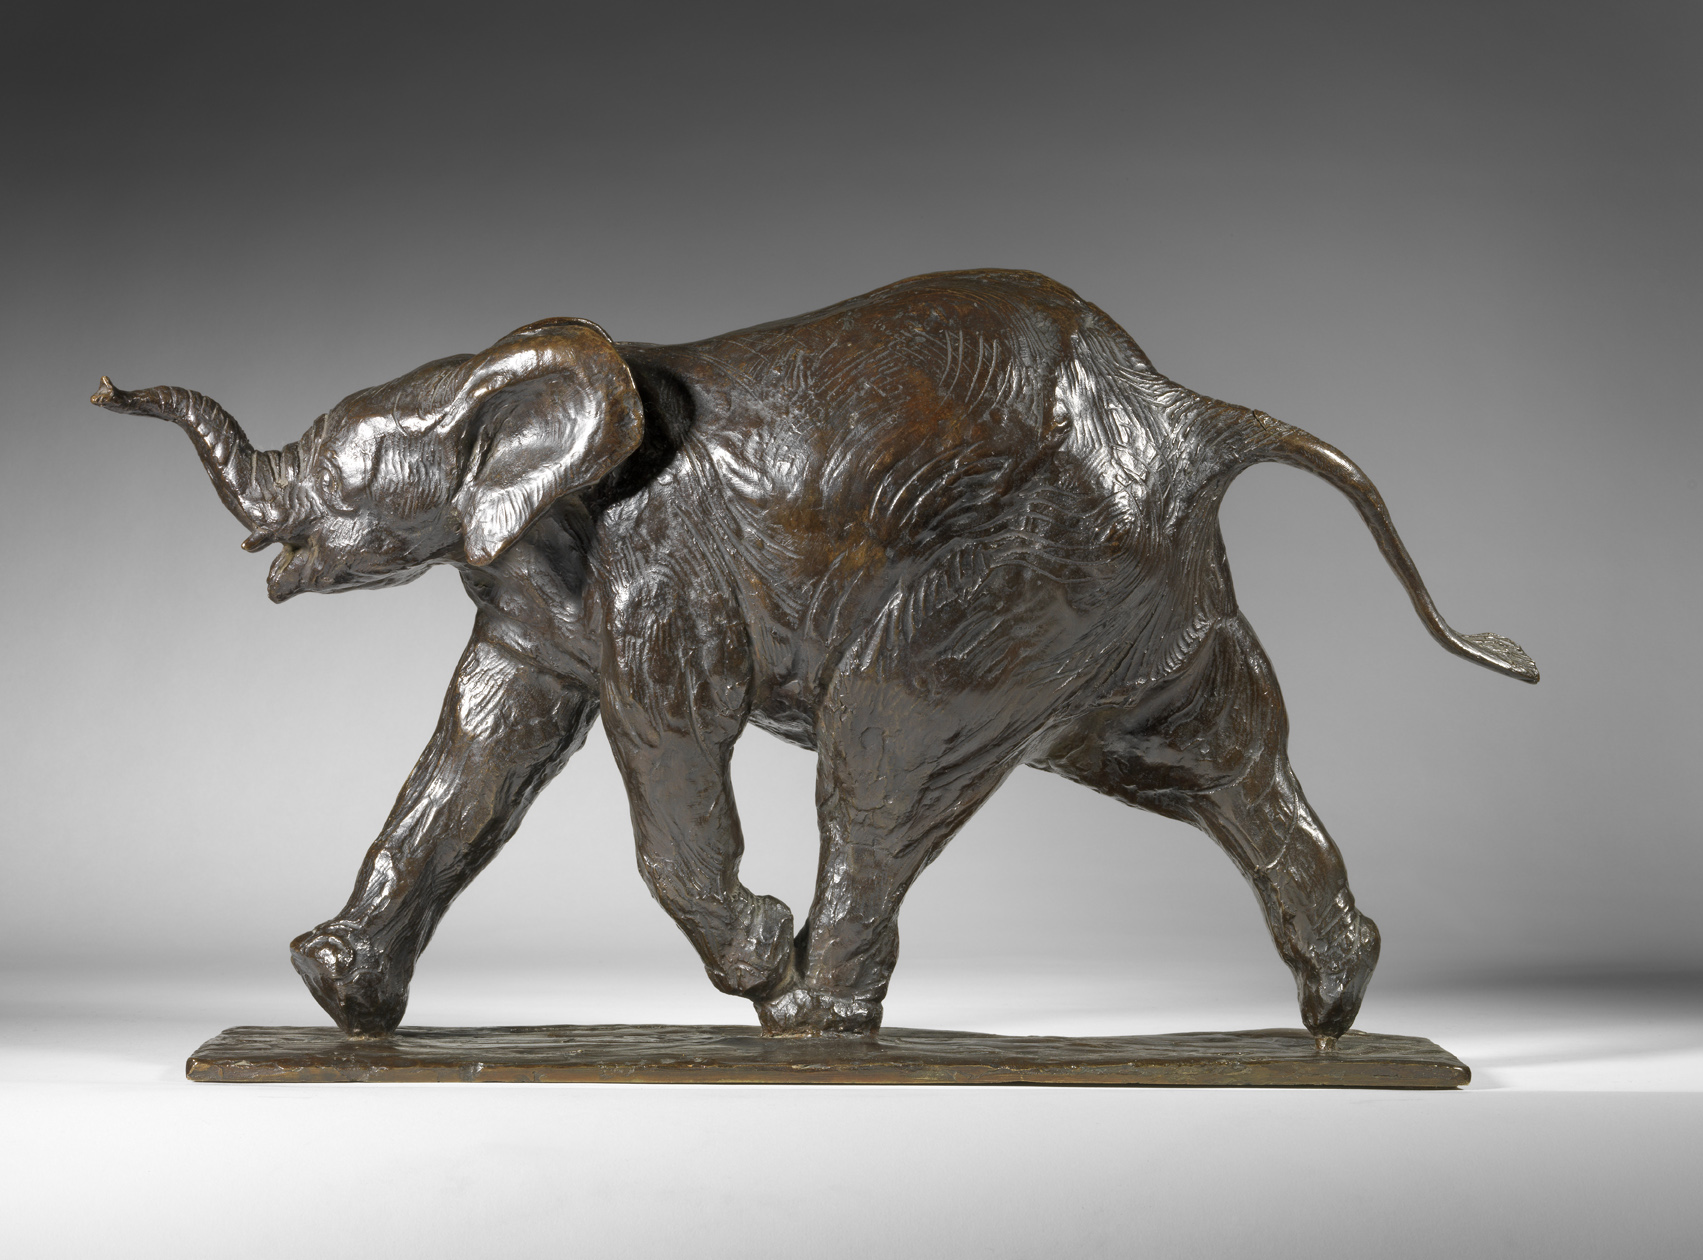 Young Running Elephant, c. 1920